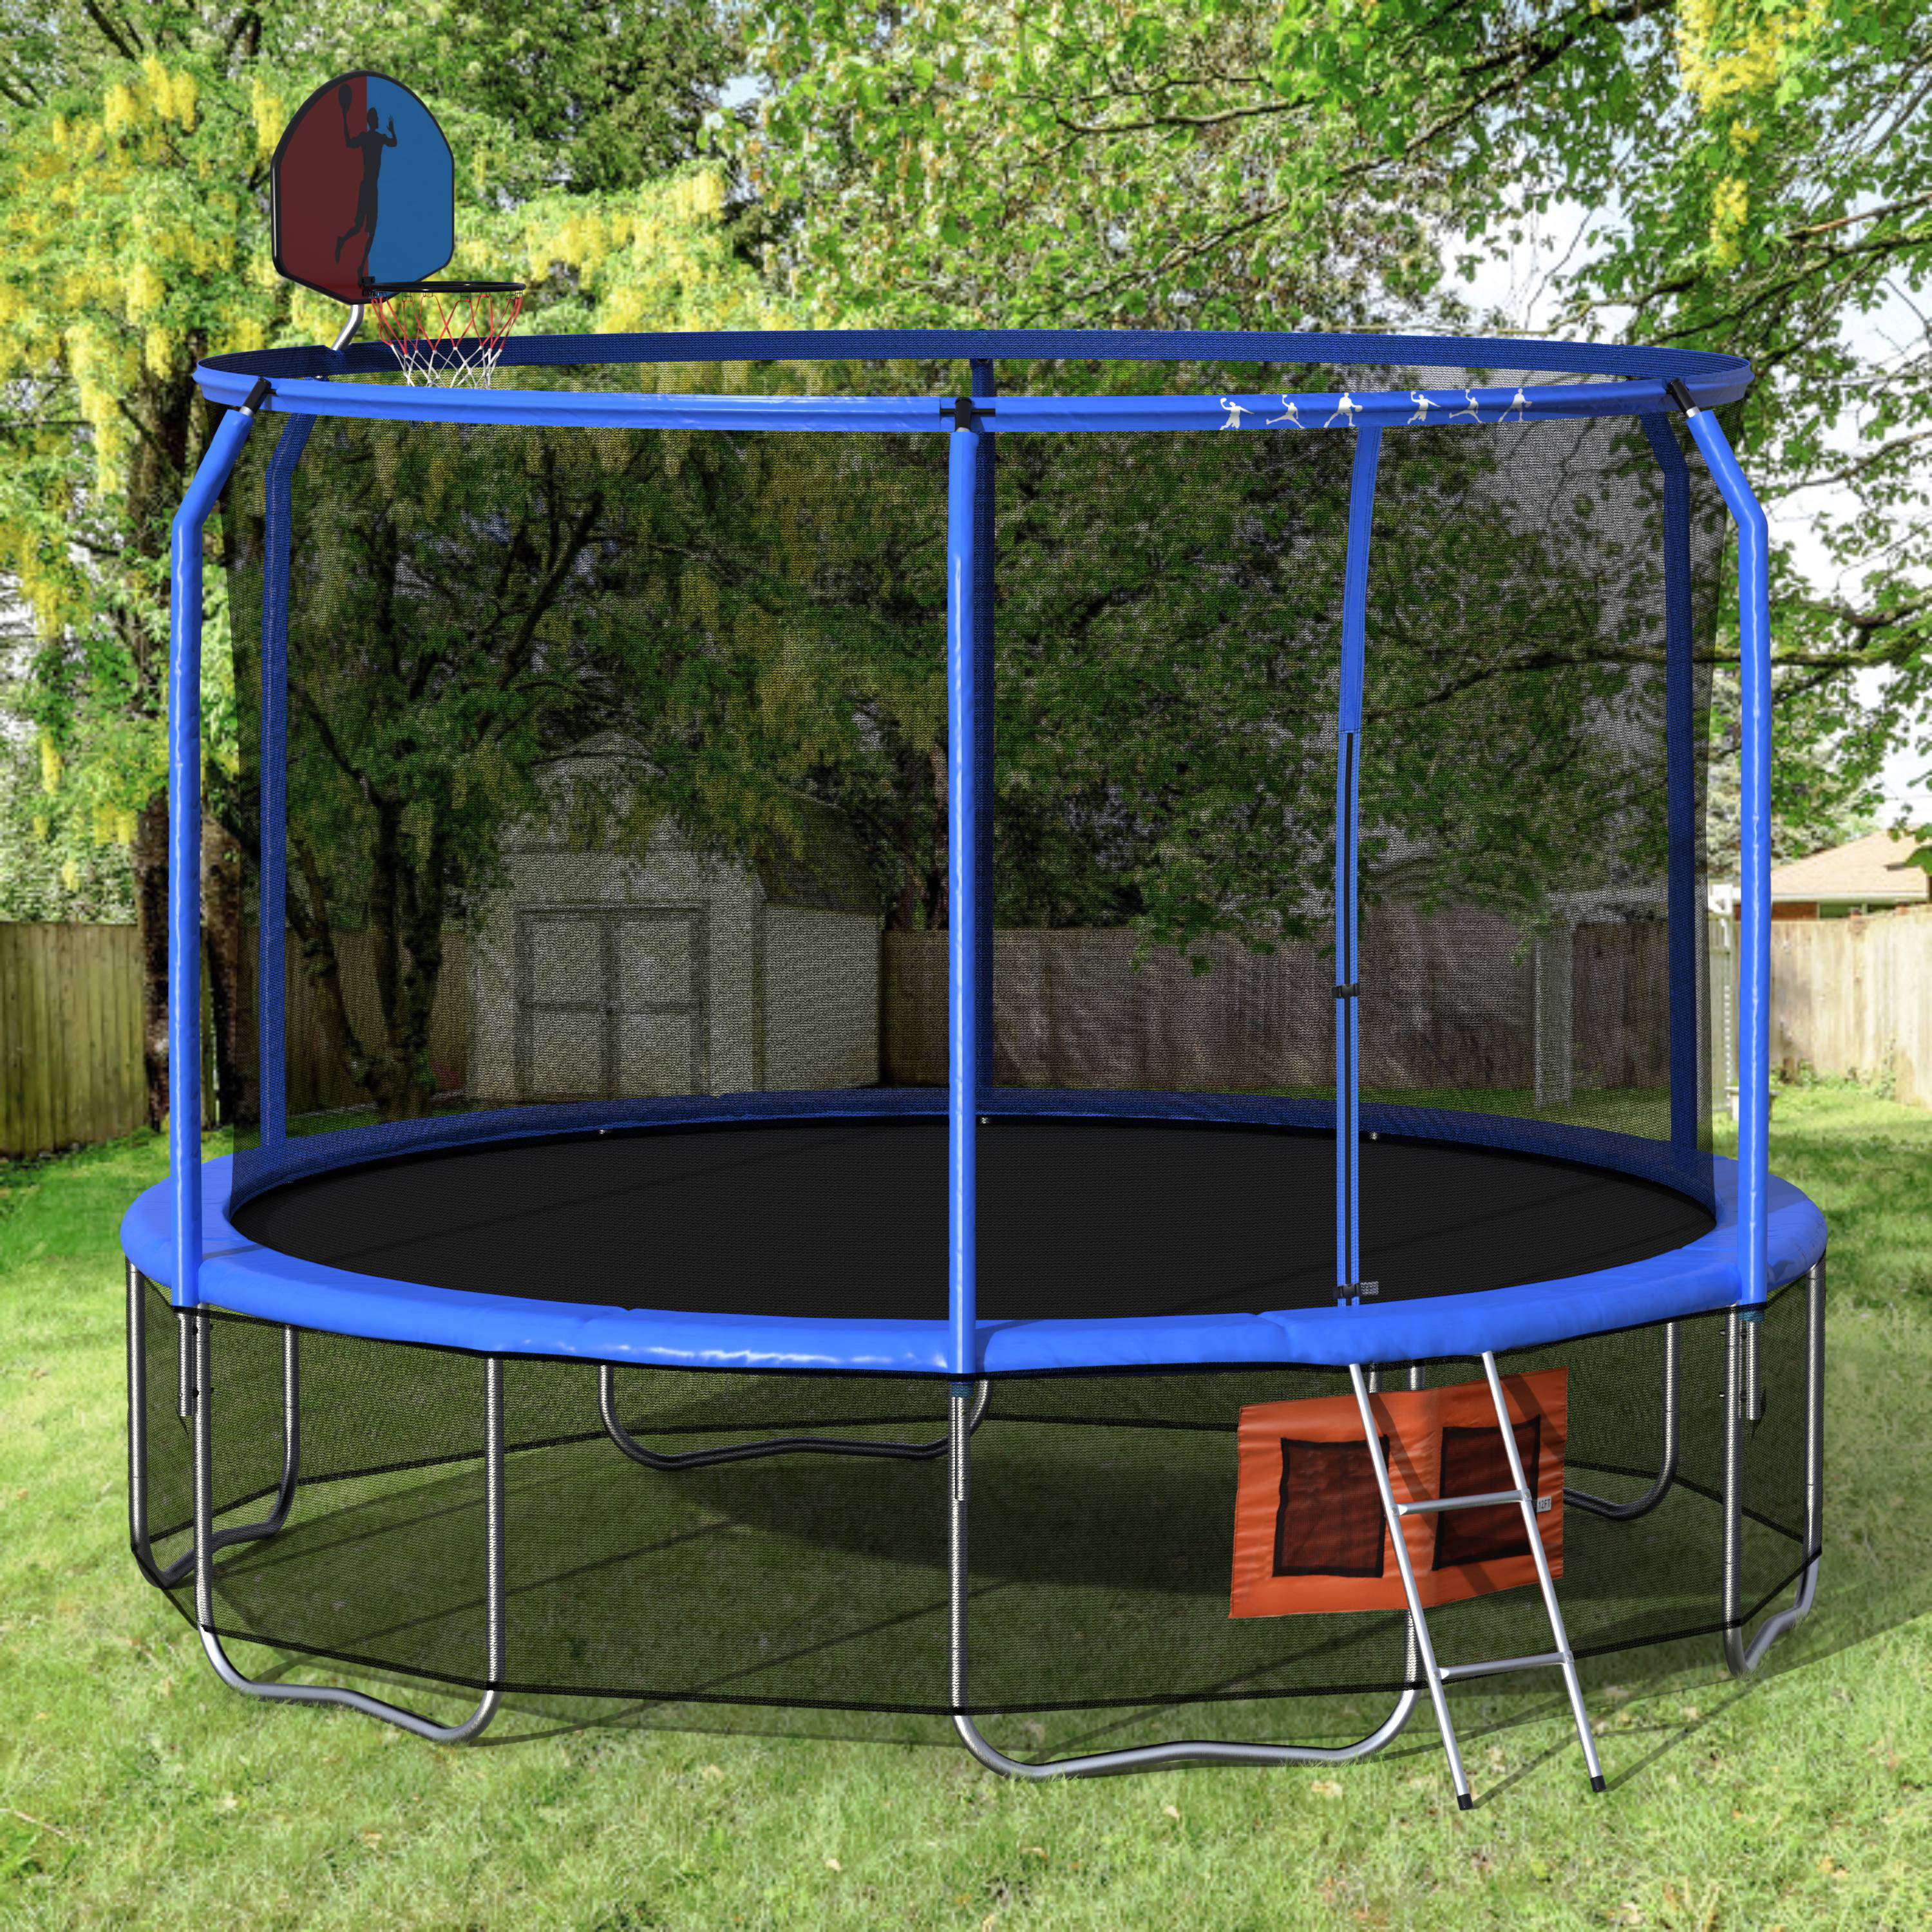 12ft Trampoline with Enclosure, New Upgraded Kids Outdoor Trampoline